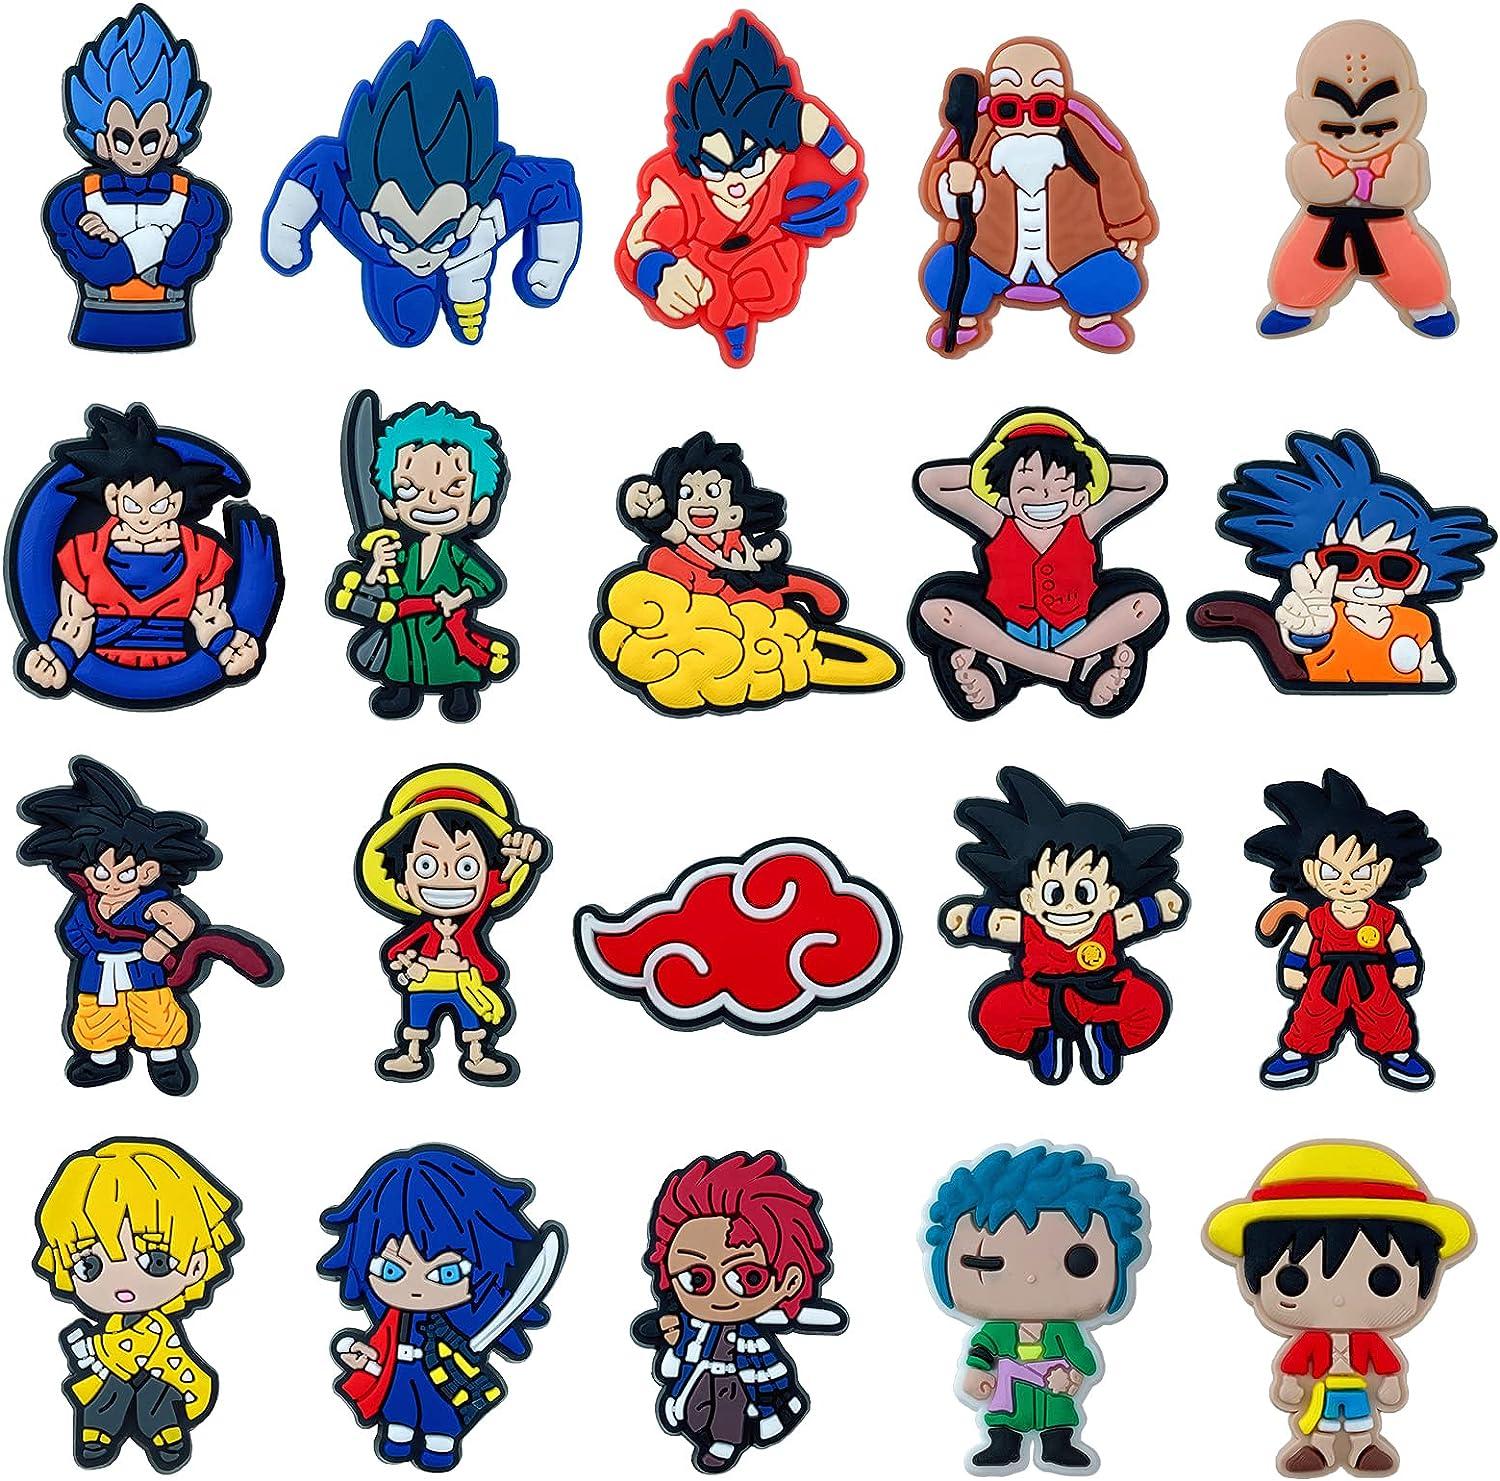 hitioCC 50 Pcs Cute Cartoon Anime Shoe Charms for Boys Girls, Cool Shoe  Charms for Kids Men, Crock Charms for Bracelets Sandals Decoration  Accessorie. 50 Cute Anime